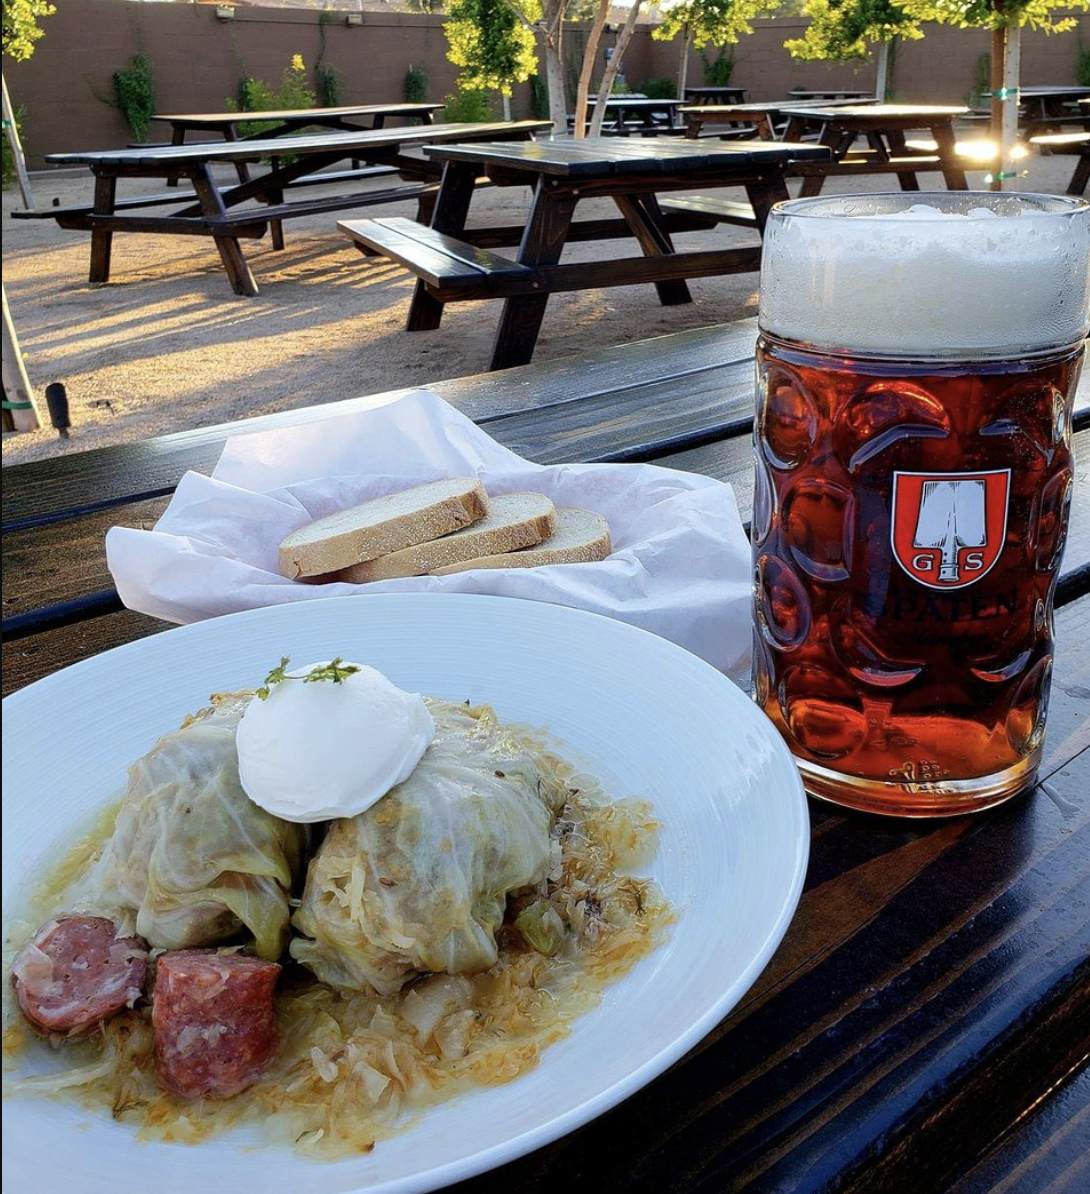 <p><b>Phoenix</b></p>With its <a href="https://www.spiegel.de/international/drinking-in-germany-soused-on-the-sidewalk-a-408286.html">liberal public drinking laws</a> and open-air biergartens, Germany’s drinking culture is almost as sacred as the country’s <a href="https://www.thelocal.de/20220513/german-state-environment-ministers-push-for-autobahn-speed-limit/">speed-limitless freeways</a>. You can get a taste of the former at <a href="https://edelweissbiergarten.com/">Edelweiss Biergarten</a> in Northern Phoenix. This German-Hungarian restaurant has the largest selection of German beer in Arizona, which you can enjoy on the restaurant’s outdoor patio — just like in Deutschland.